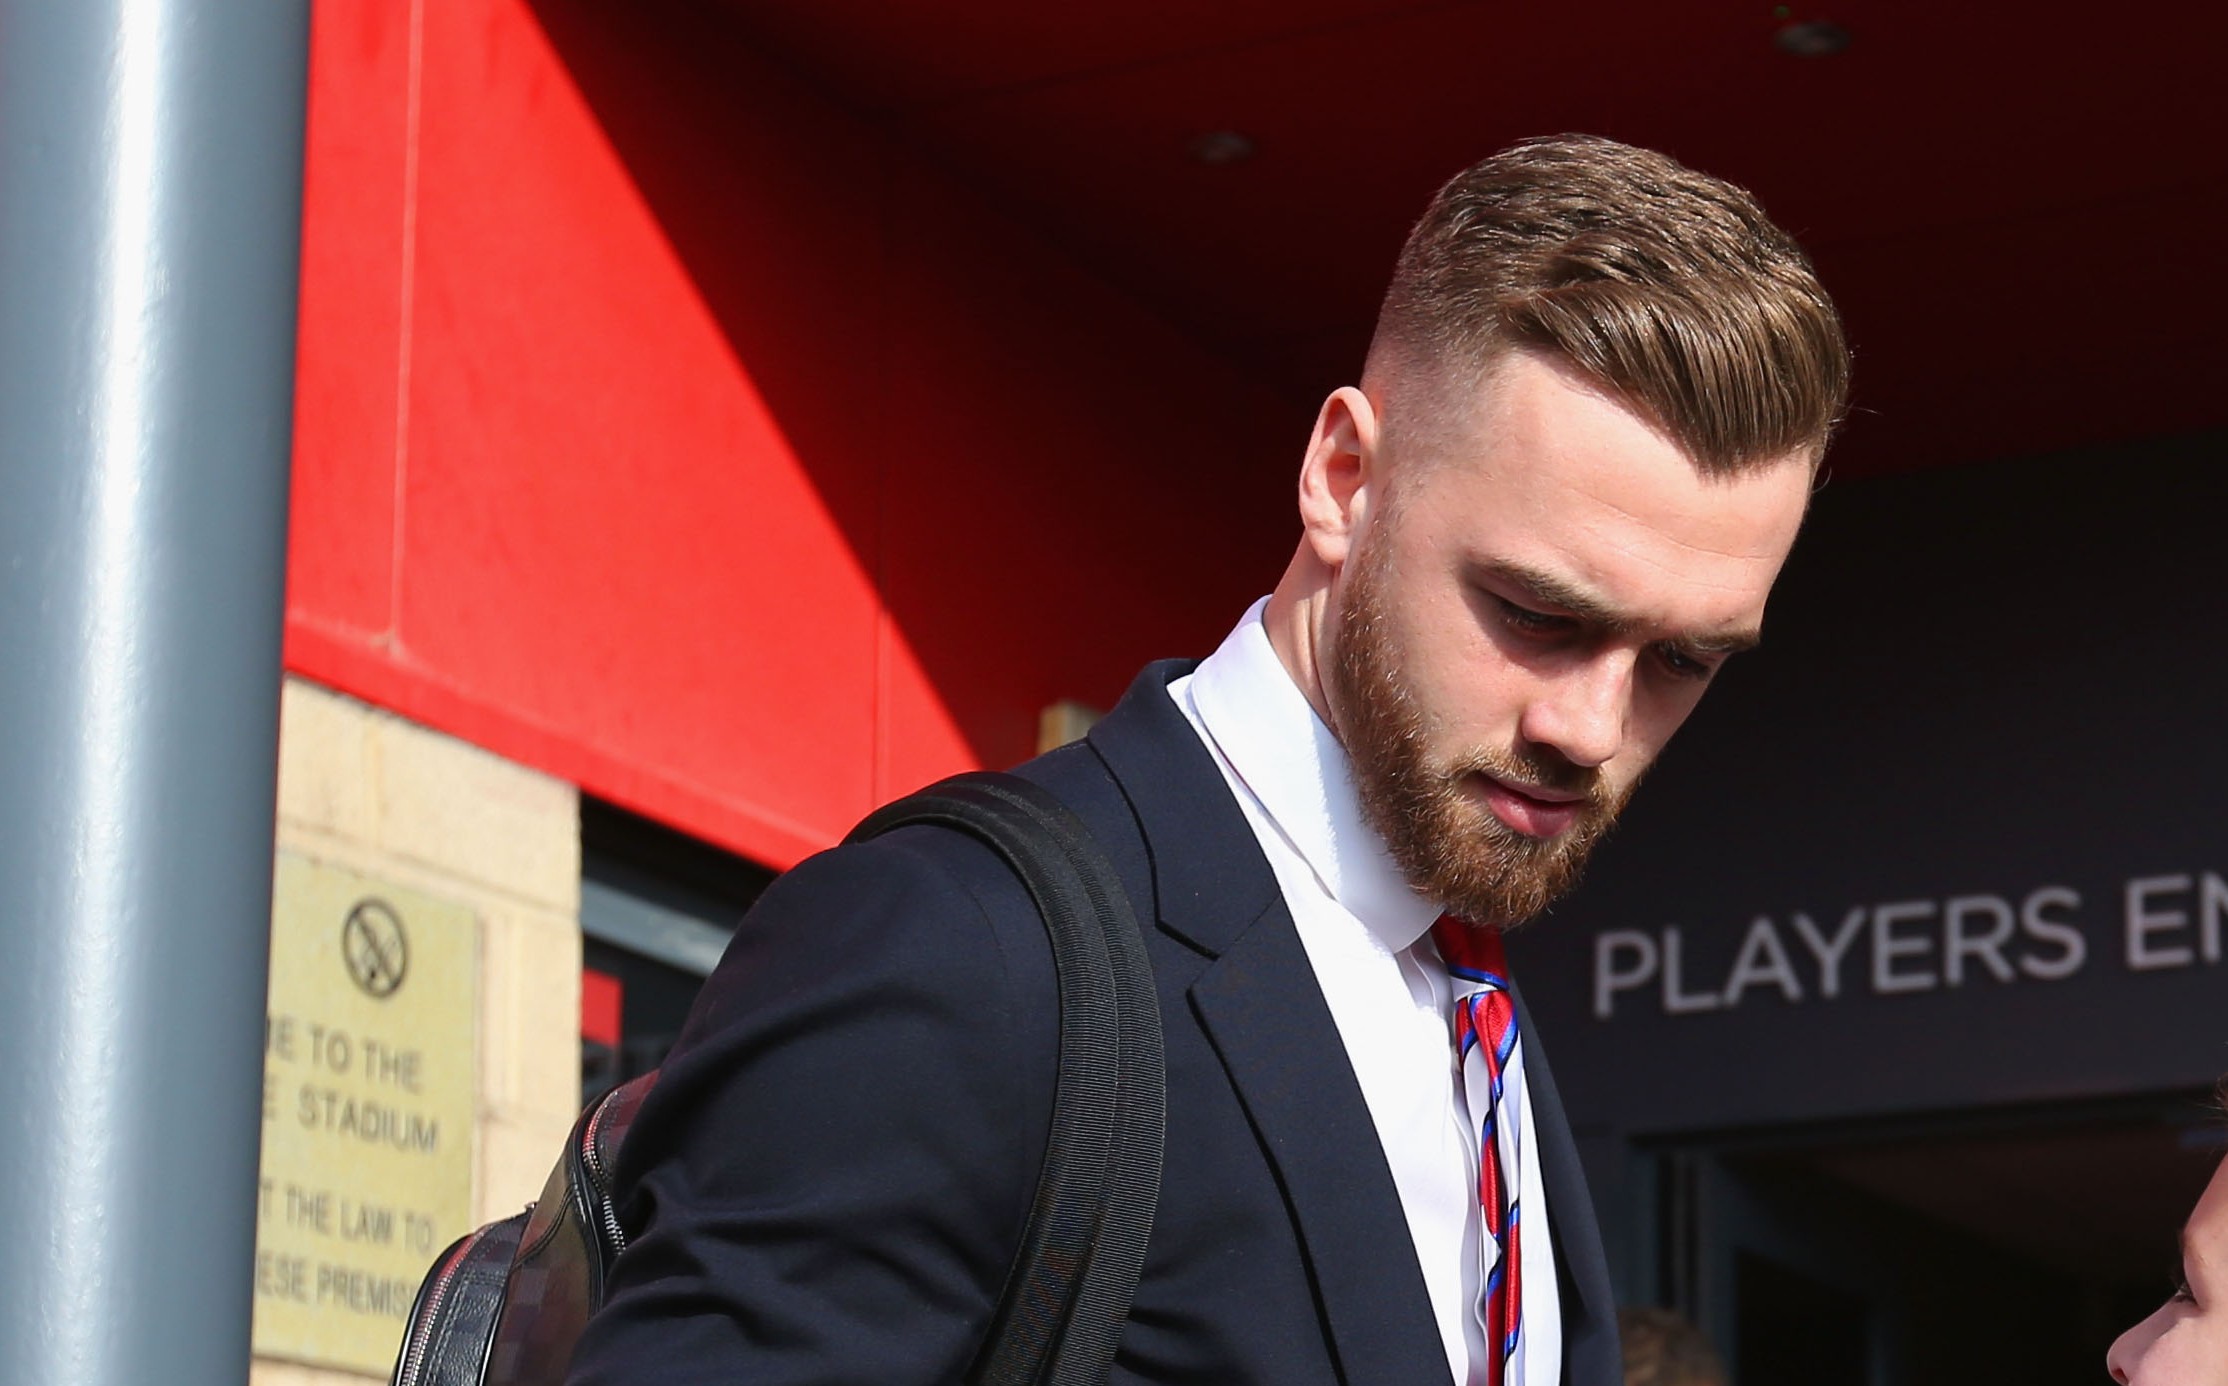 MIDDLESBROUGH, ENGLAND - FEBRUARY 18: Calum Chambers of Middlesbrough signs autographs outside the stadium prior to The Emirates FA Cup Fifth Round match between Middlesbrough and Oxford United at Riverside Stadium on February 18, 2017 in Middlesbrough, England.  (Photo by Alex Livesey/Getty Images)